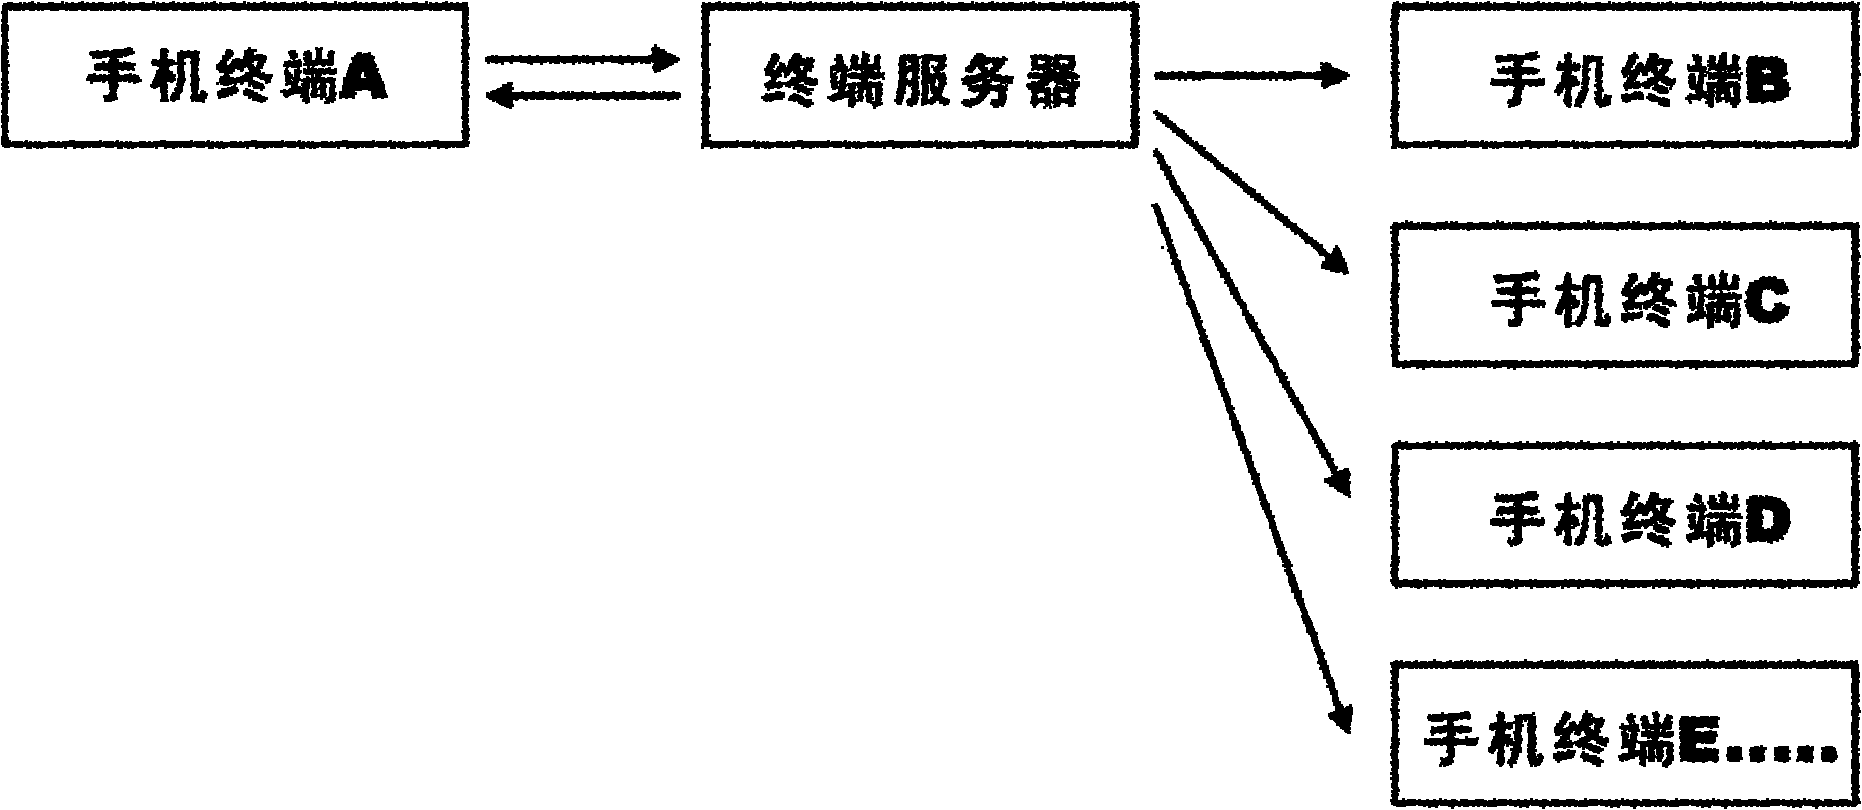 Cellphone based message release method